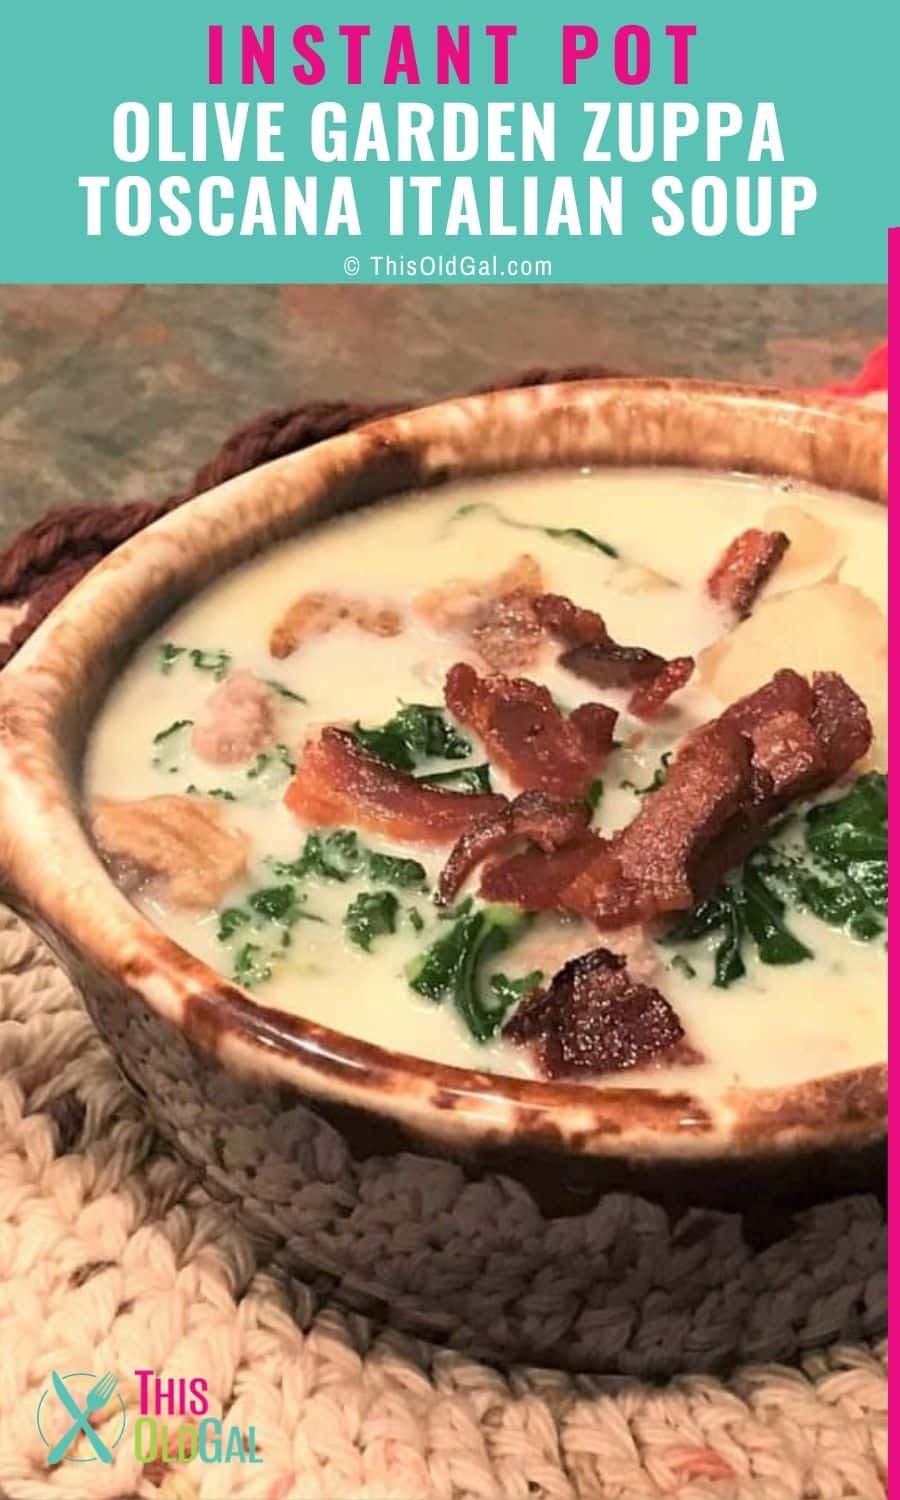 A bowl of Olive Garden Zuppa Toscana Italian Soup